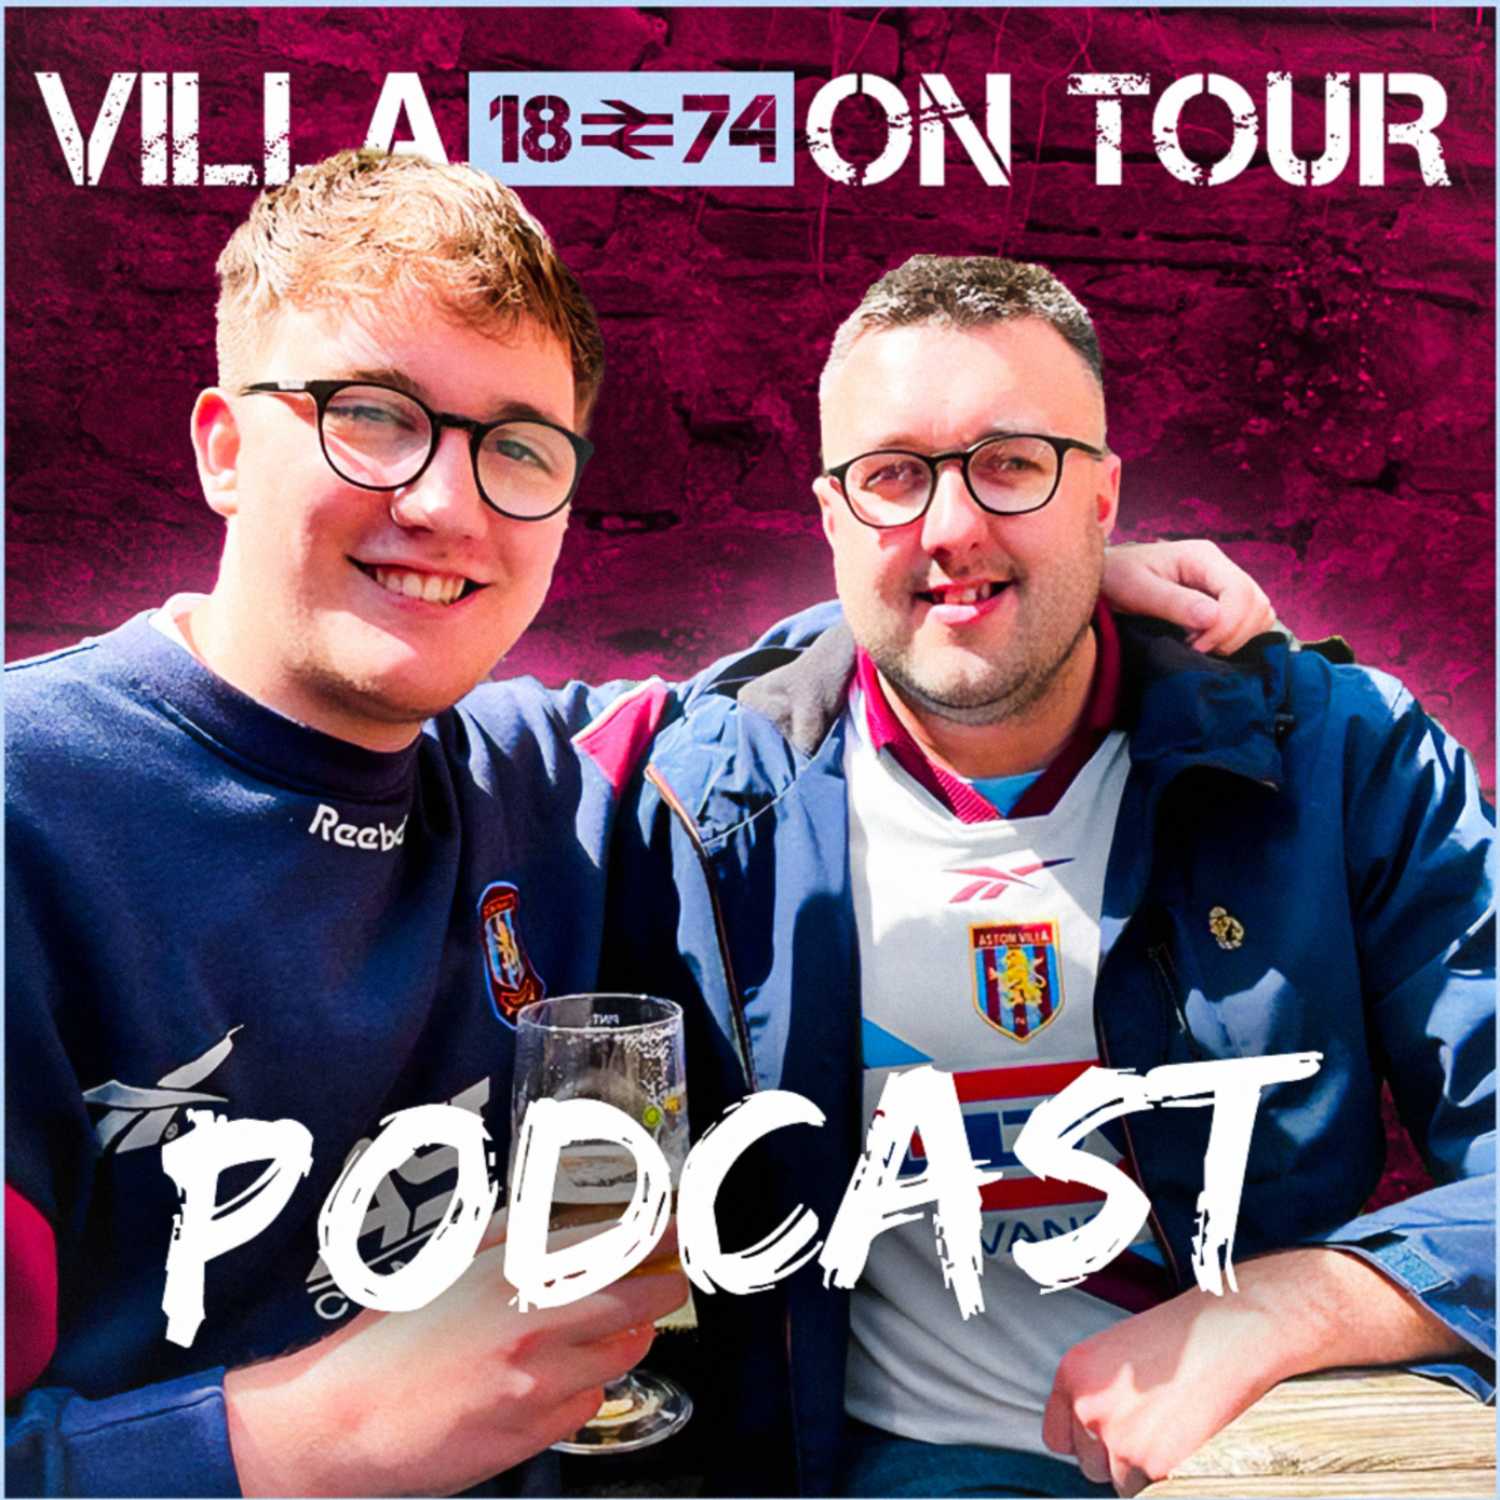 INSIDE THE AWAY END: Brilliant Villa secure another awayday win at Burnley